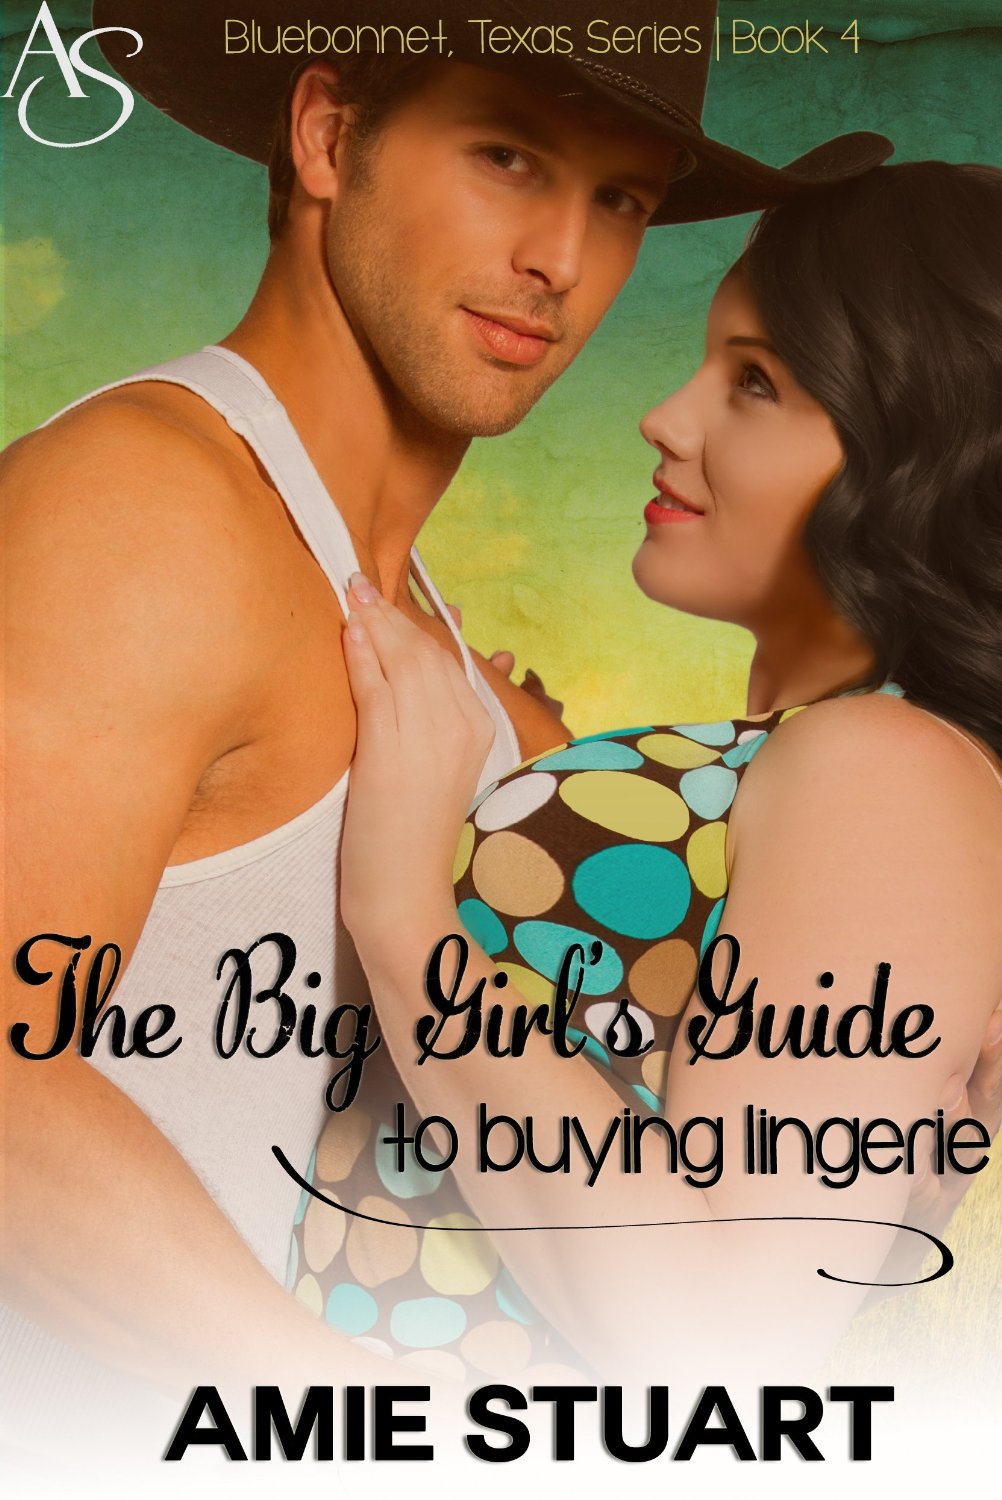 The Big Girl’s Guide To Buying Lingerie by Amie Stuart